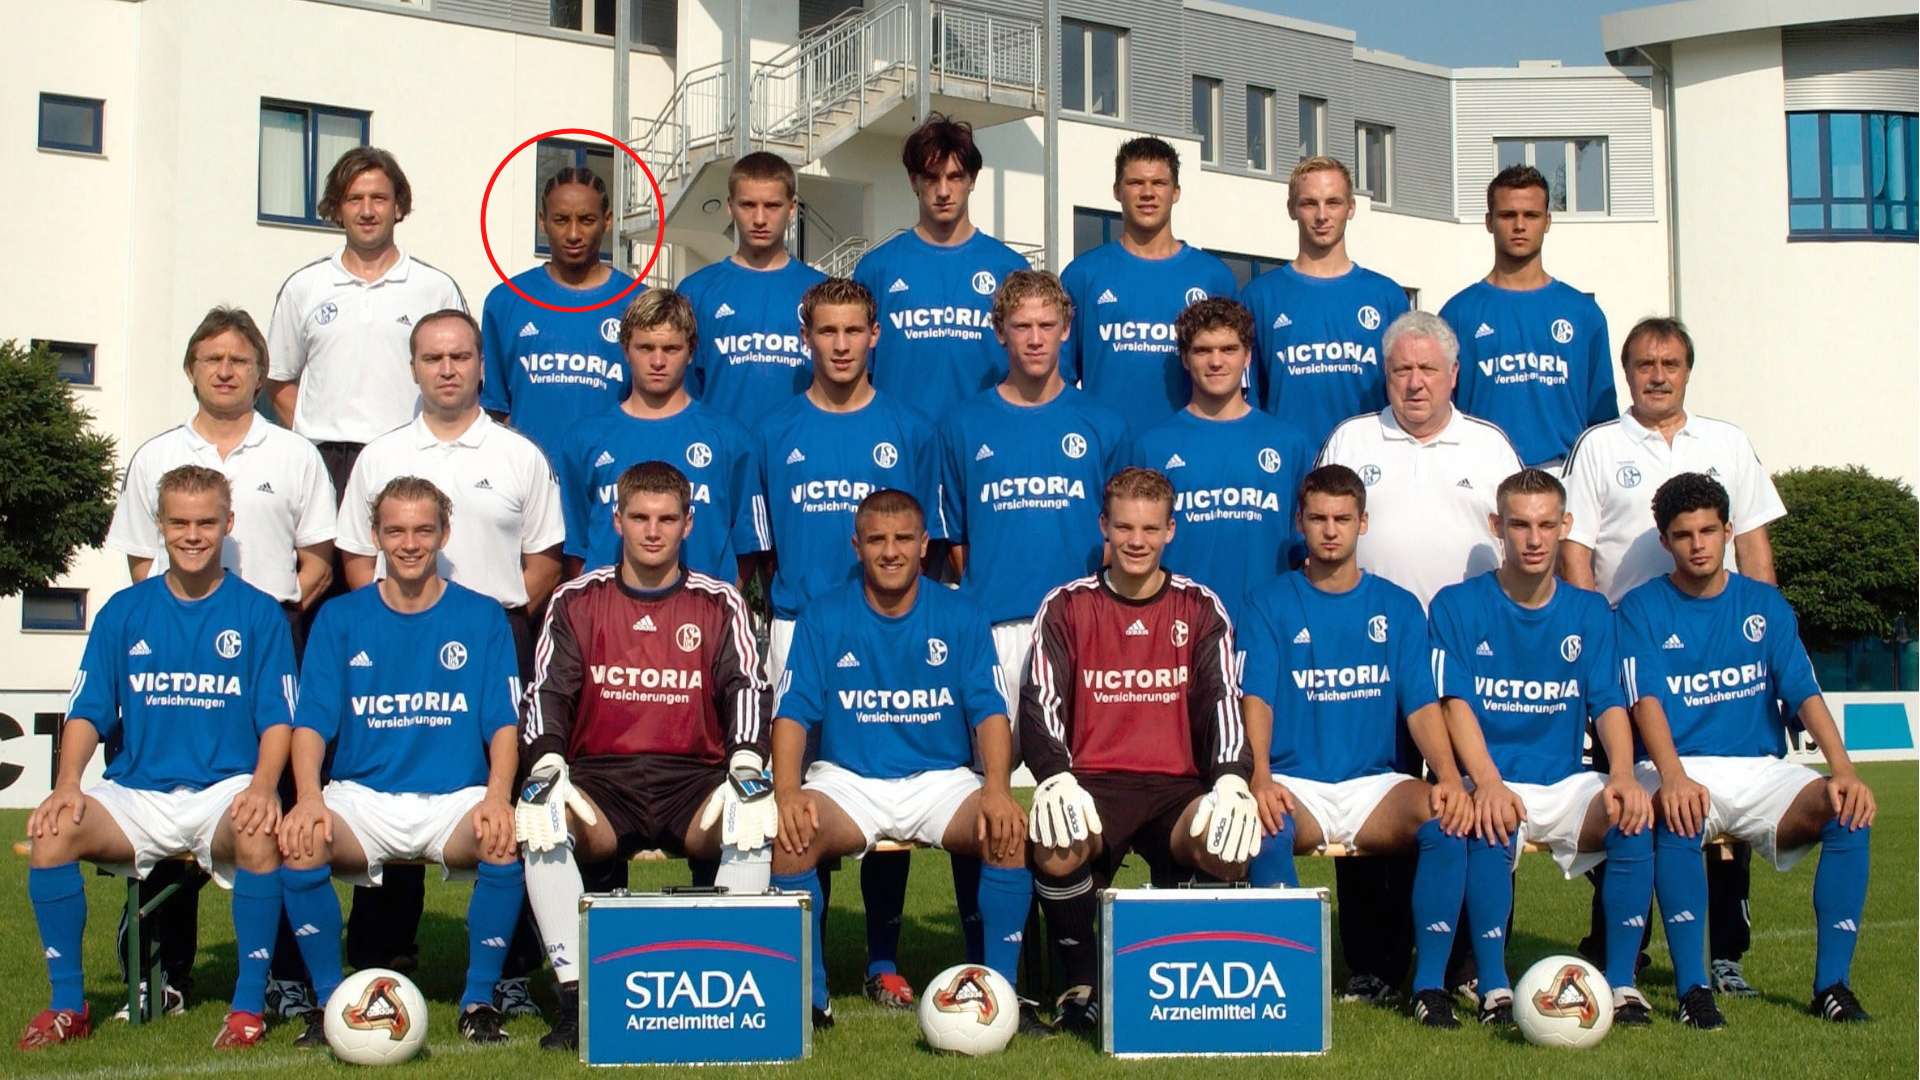 Former Schalke Defender Discovered to be Alive after Four Years